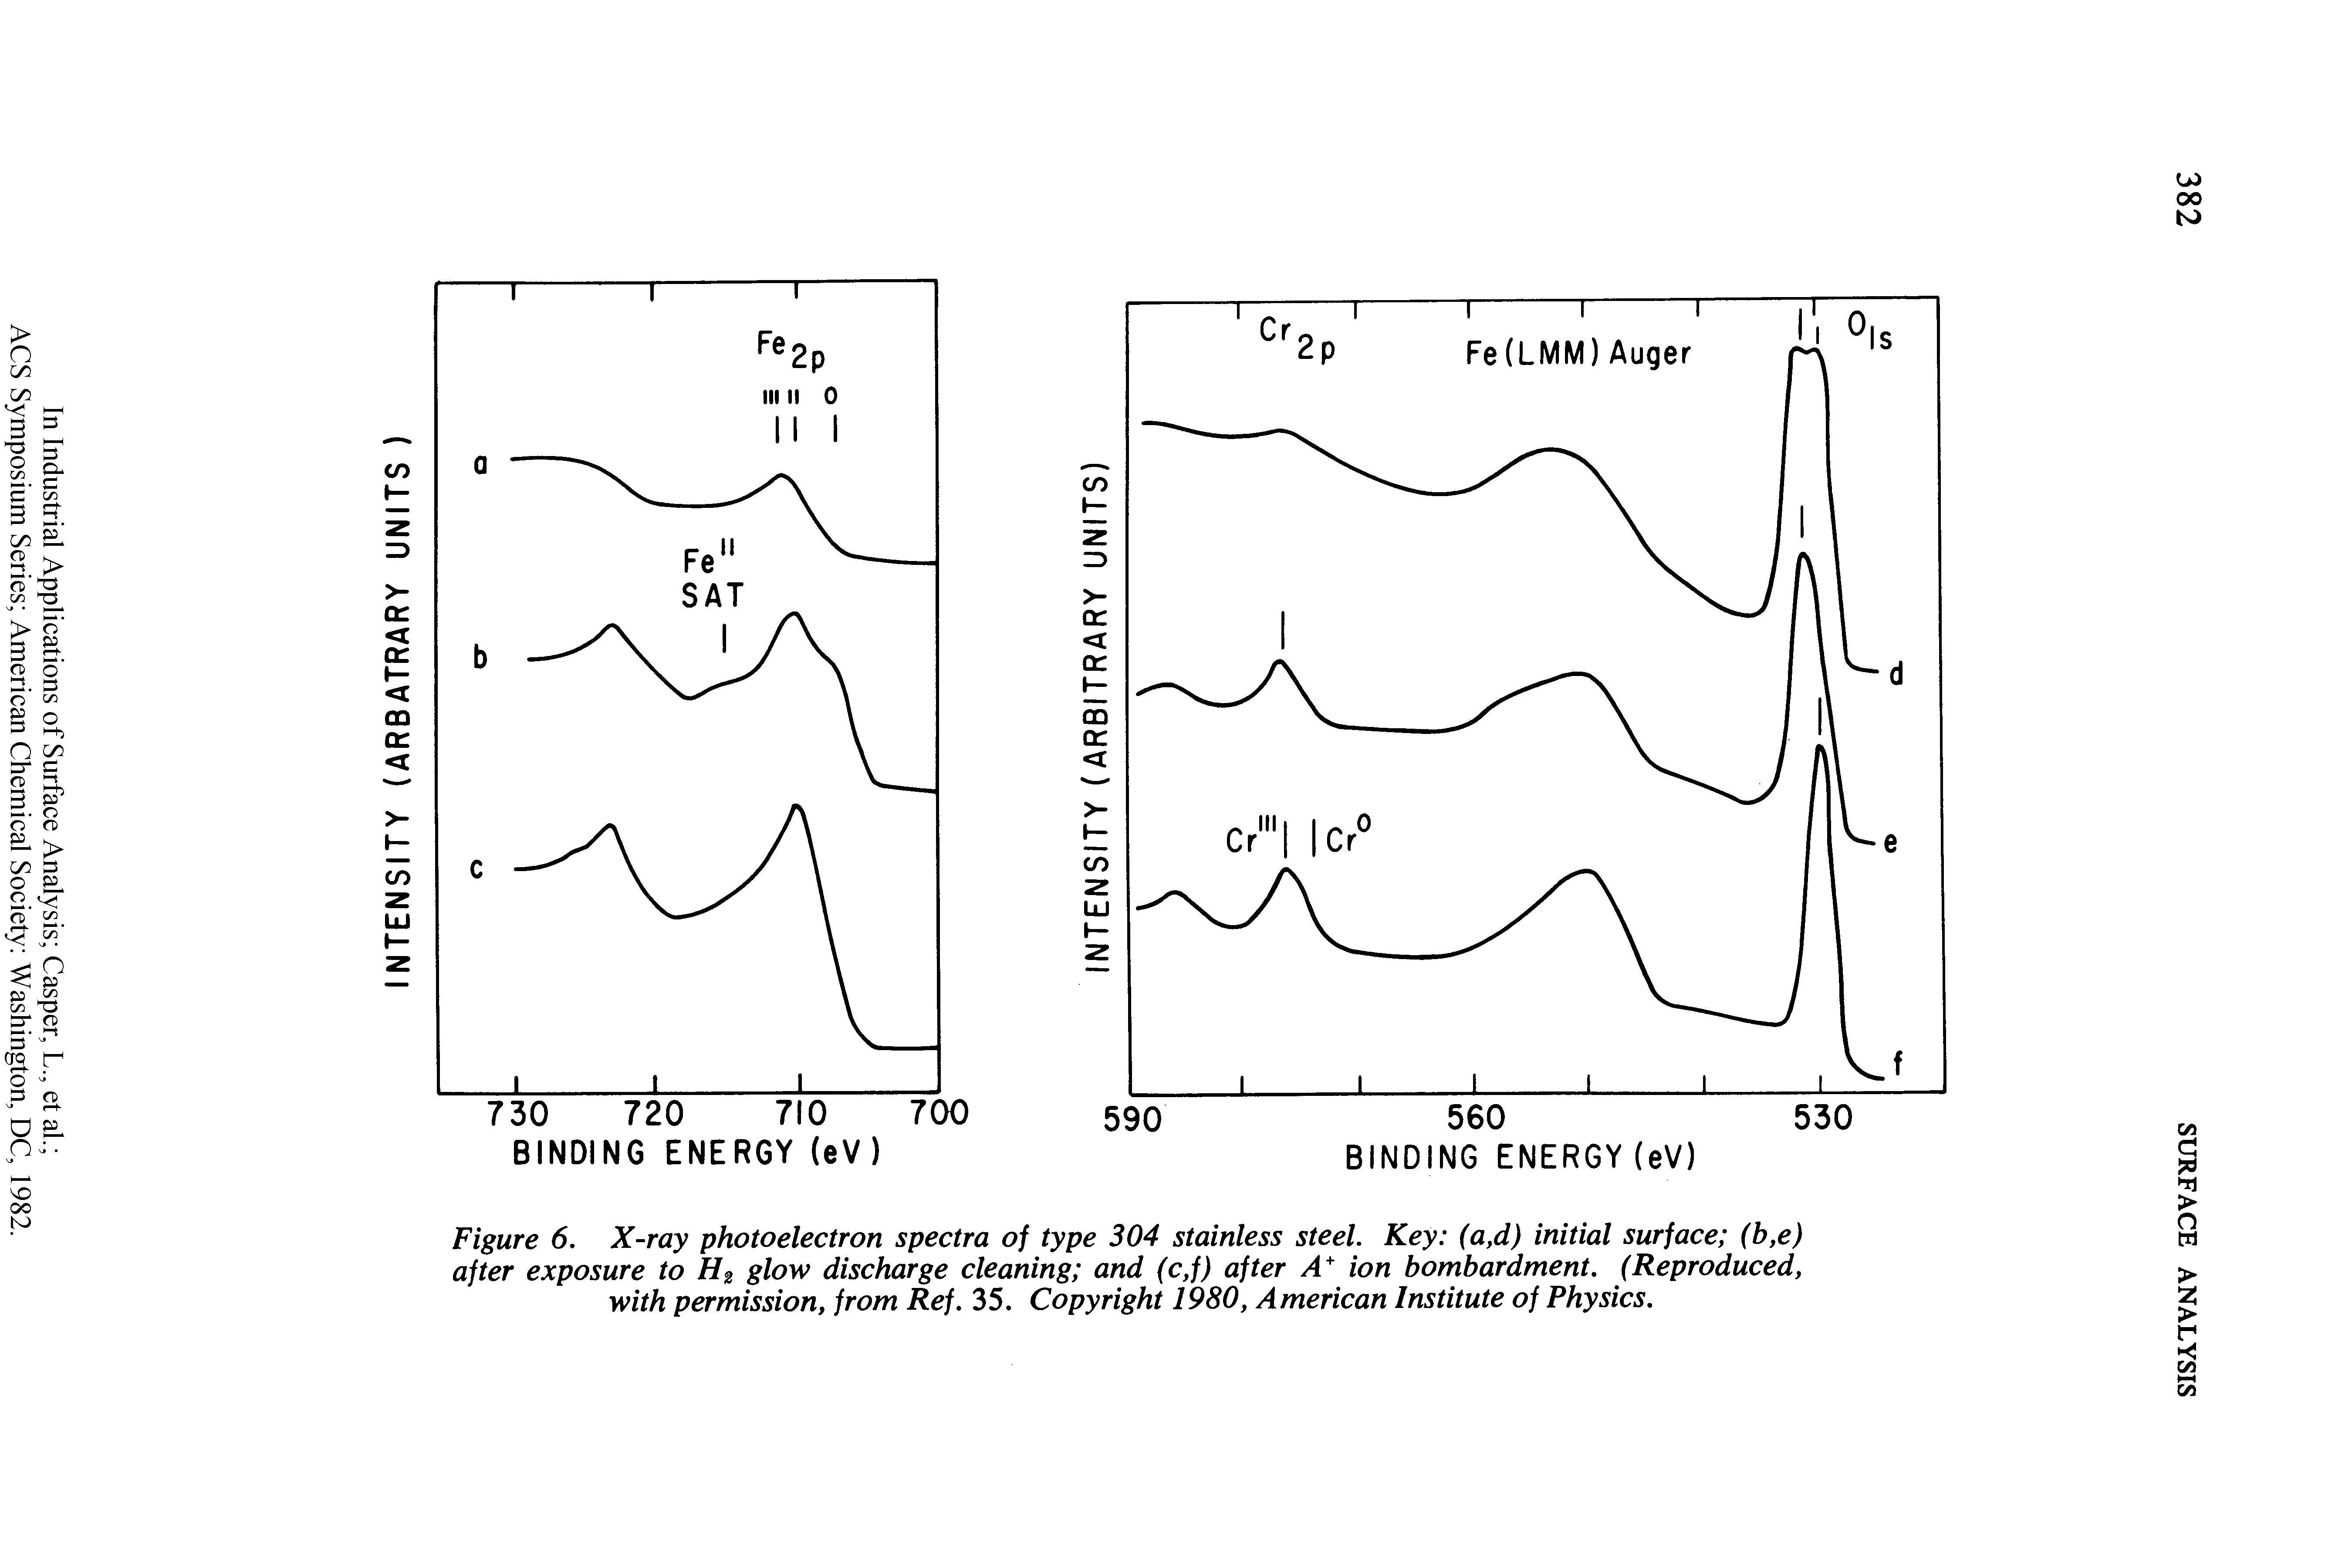 Figure 6. X-ray photoelectron spectra of type 304 stainless steel. Key (a,d) initial surface (b,e) after exposure to H2 glow discharge cleaning and (c,f) after A+ ion bombardment. (Reproduced, with permission, from Ref. 35. Copyright 1980, American Institute of Physics.